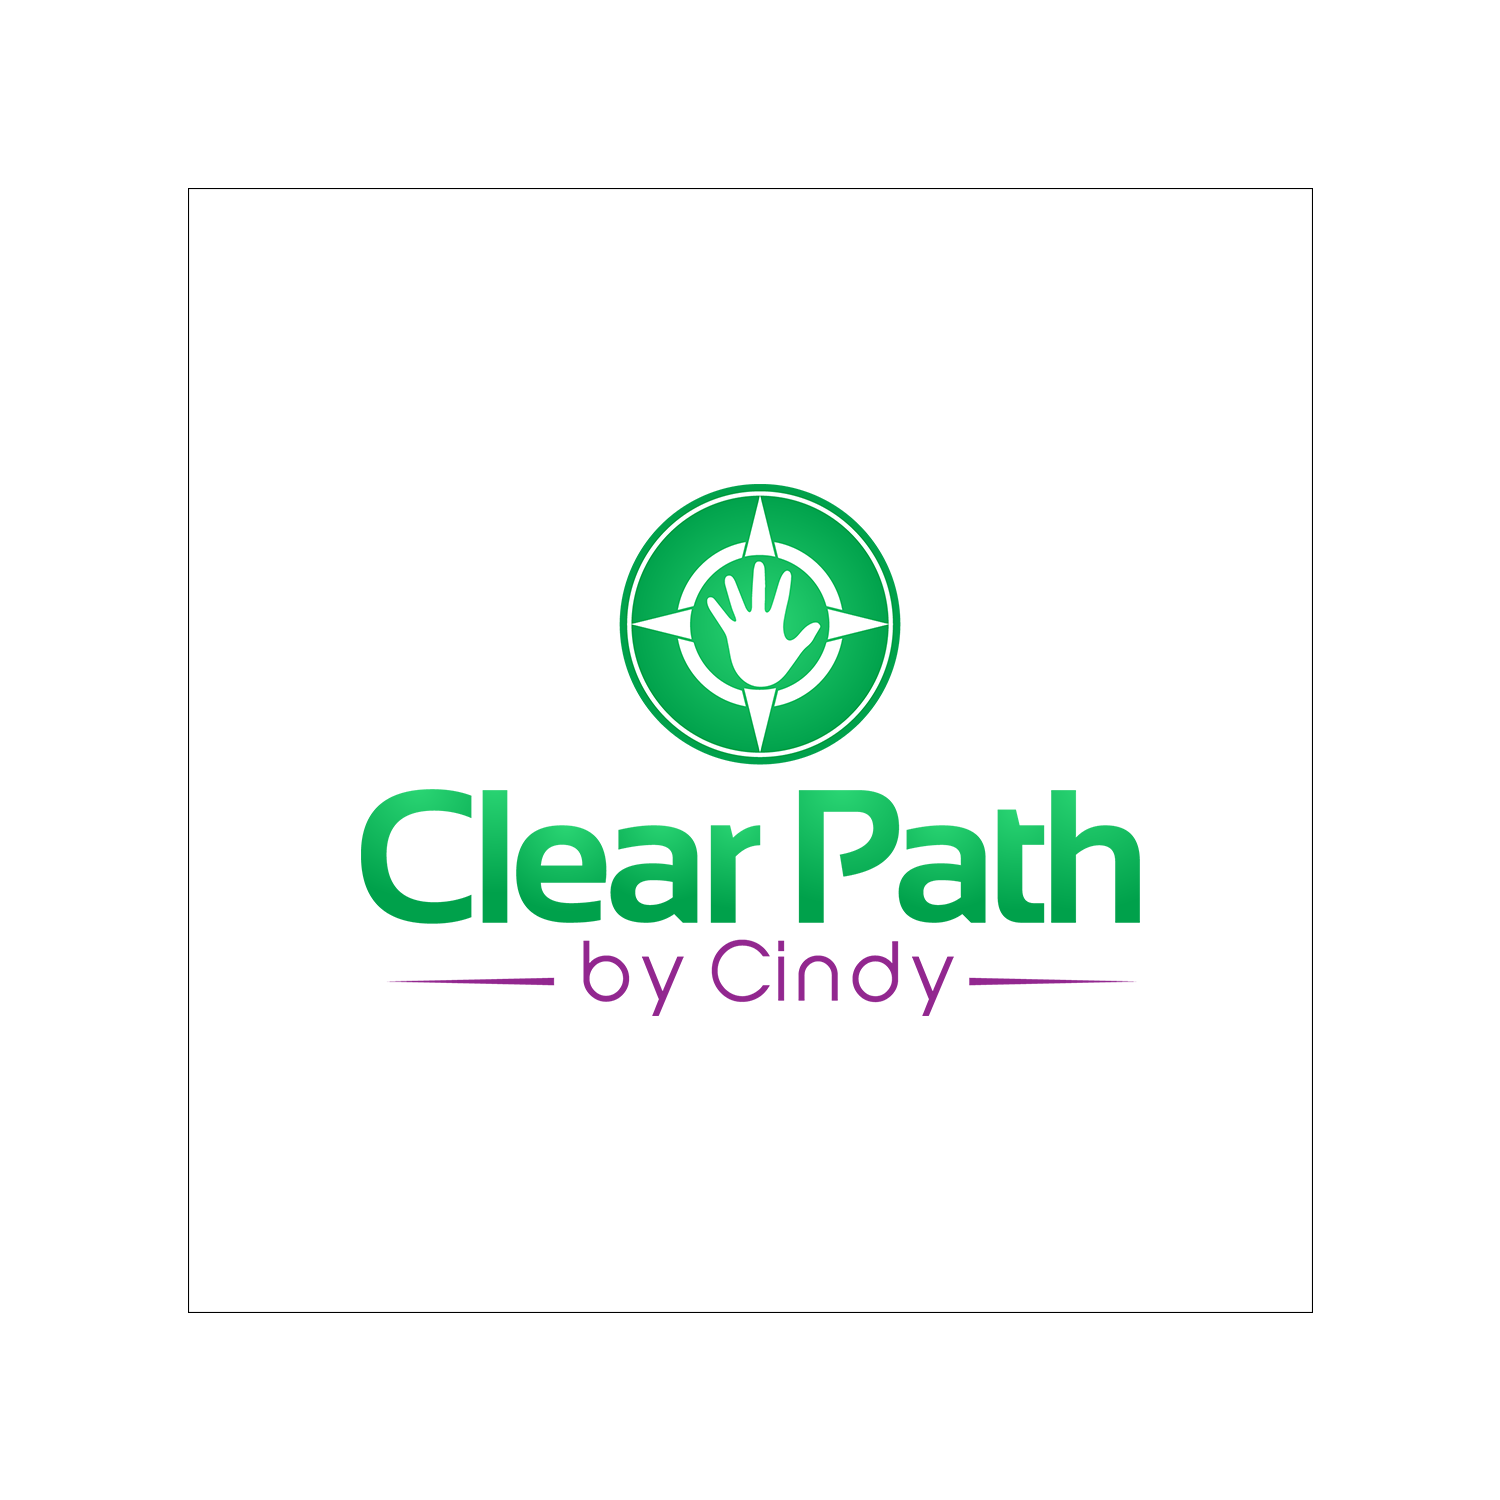 Clear Path by Cindy